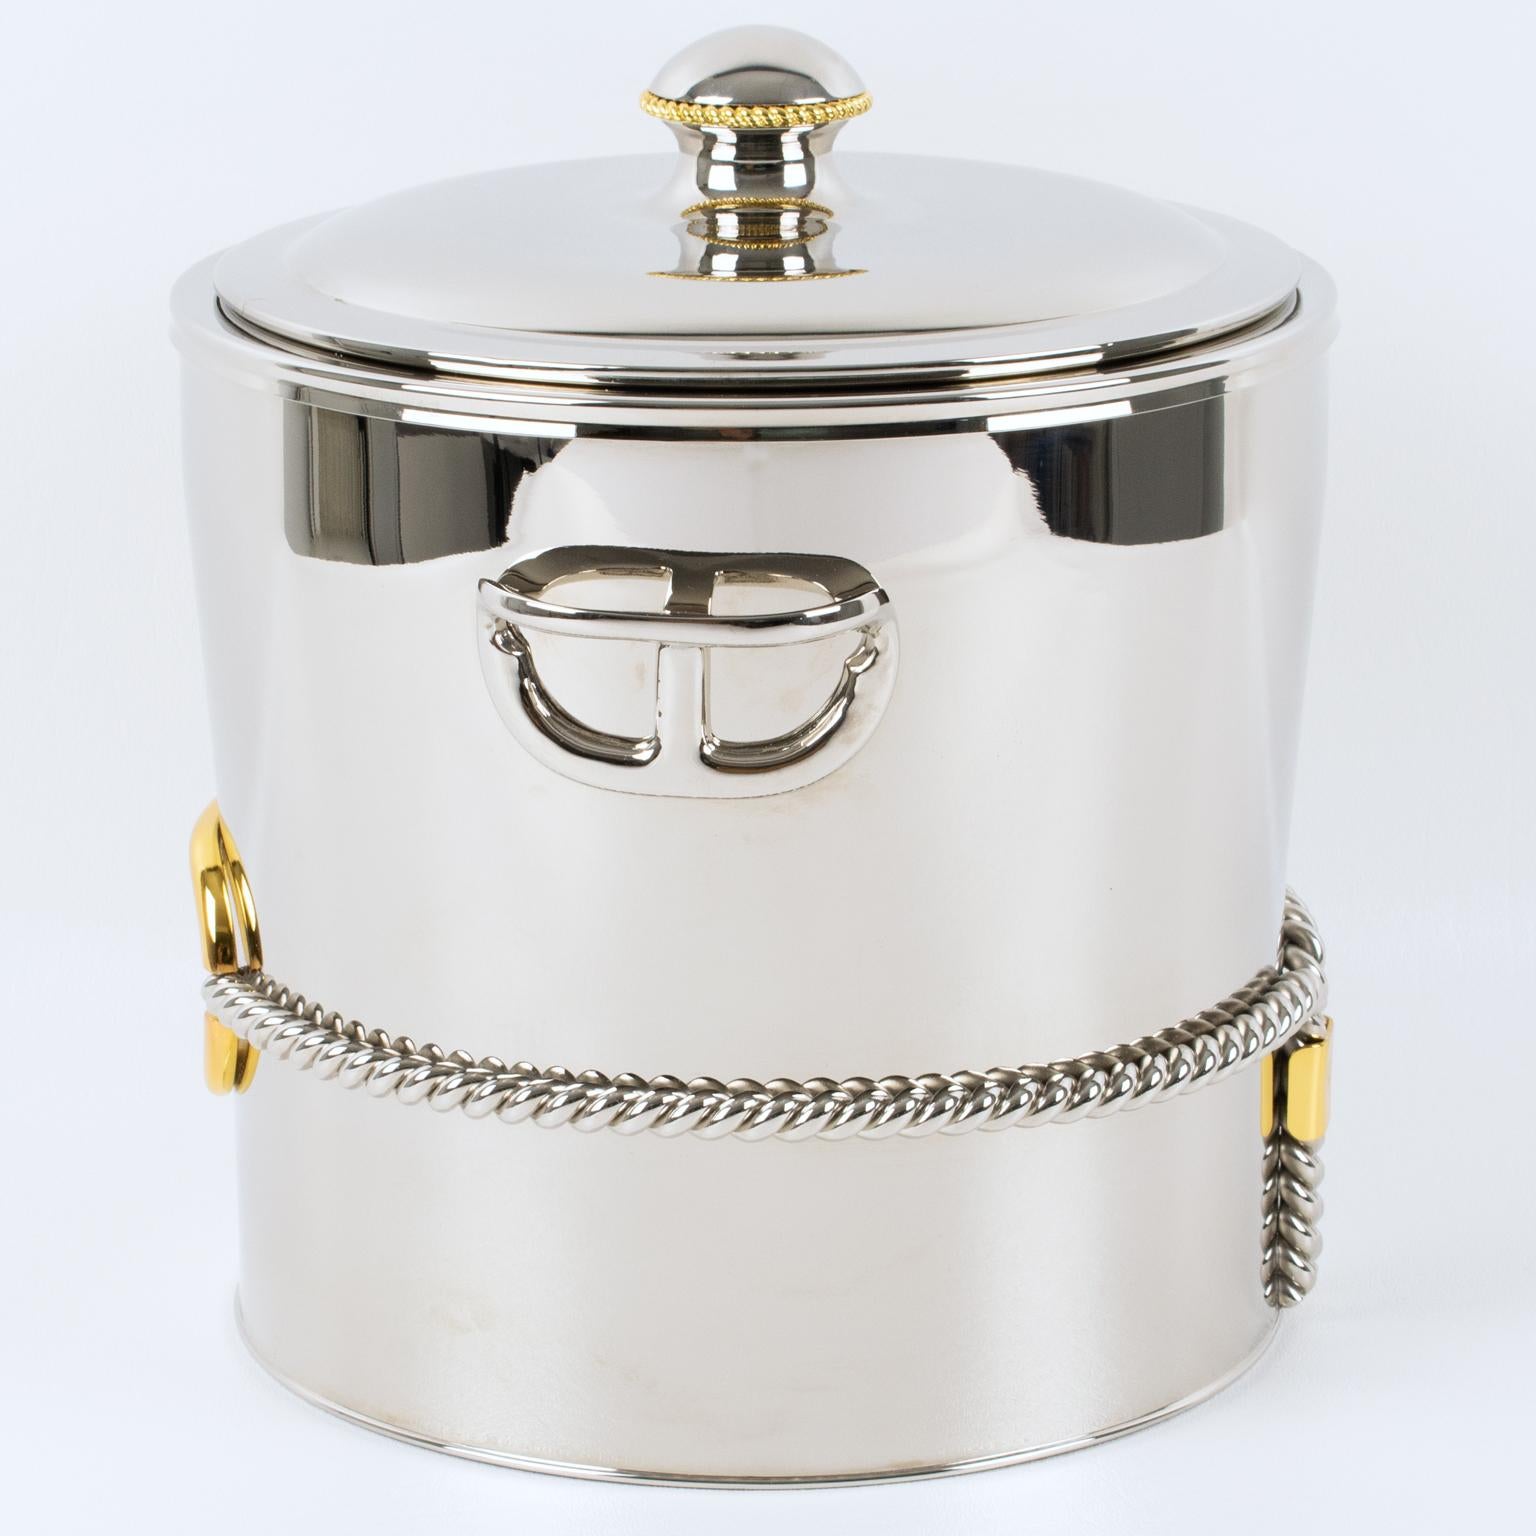 Gucci Italy Silvered and Gold Plated Metal Barware Ice Bucket In Excellent Condition For Sale In Atlanta, GA